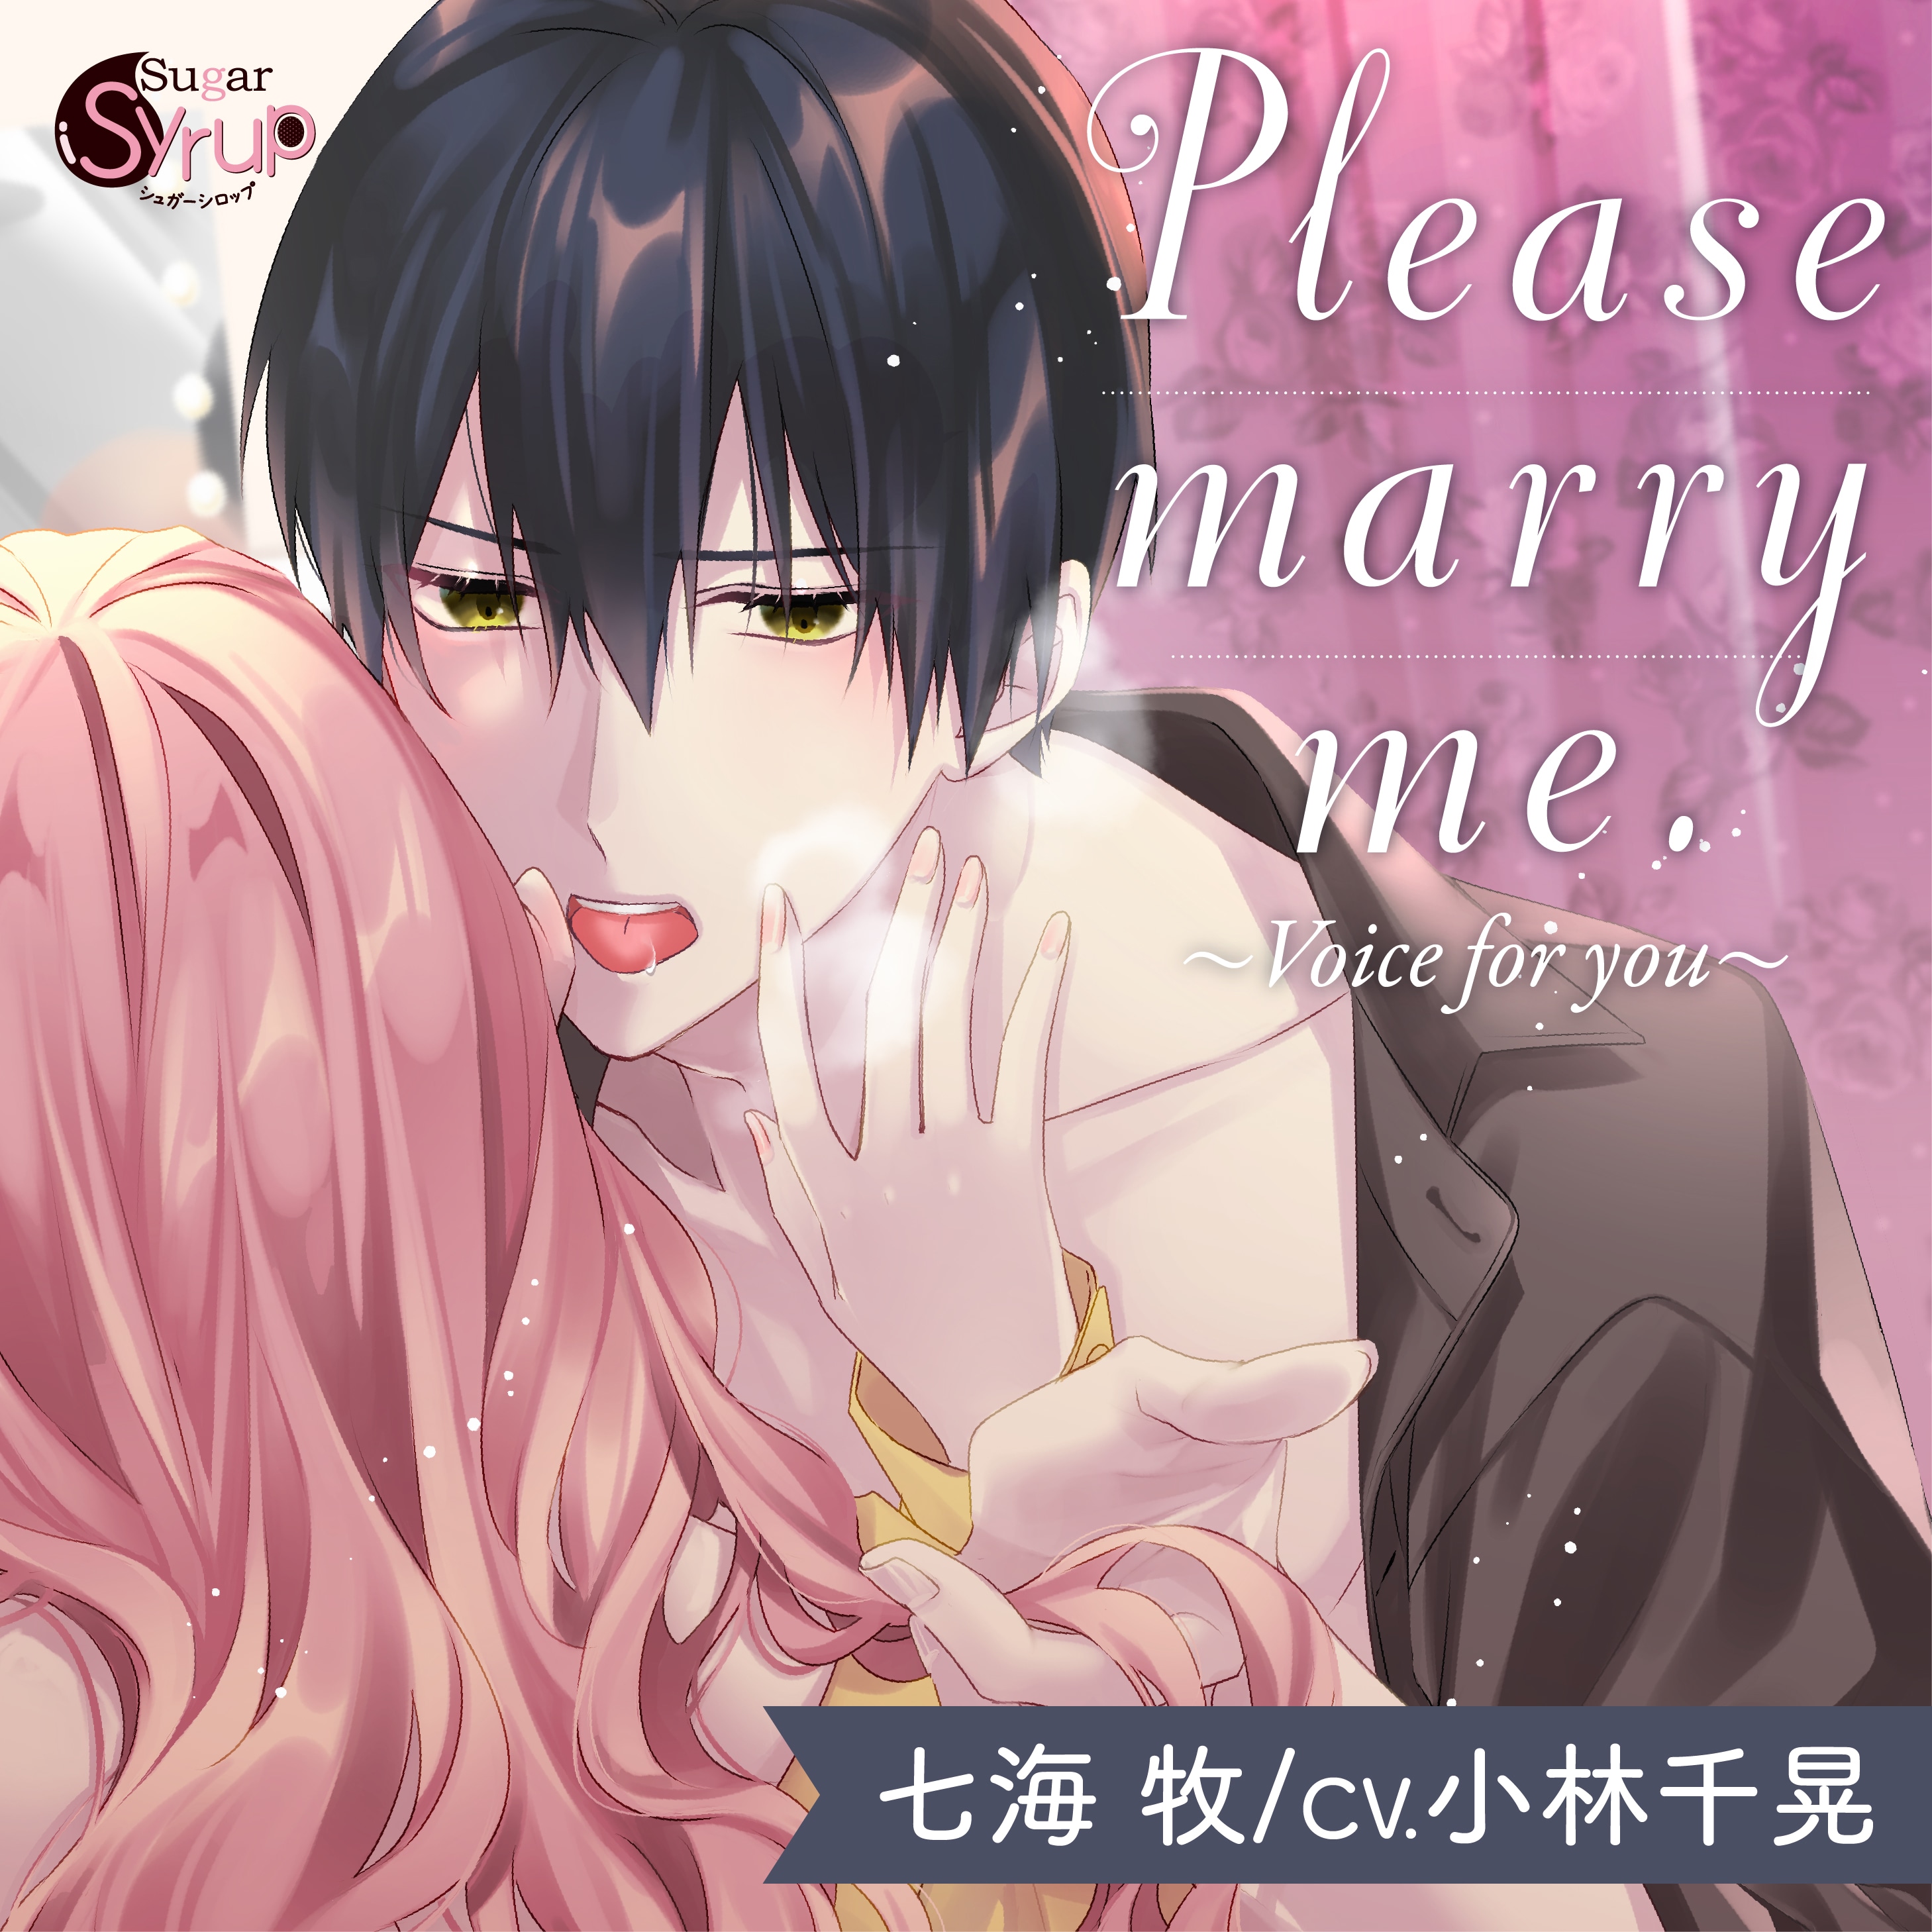 Please marry me.～Voice for you～（出演声優：小林千晃 青樹鮎希）が「ポケットドラマCD」にて独占先行配信開始！の画像-1